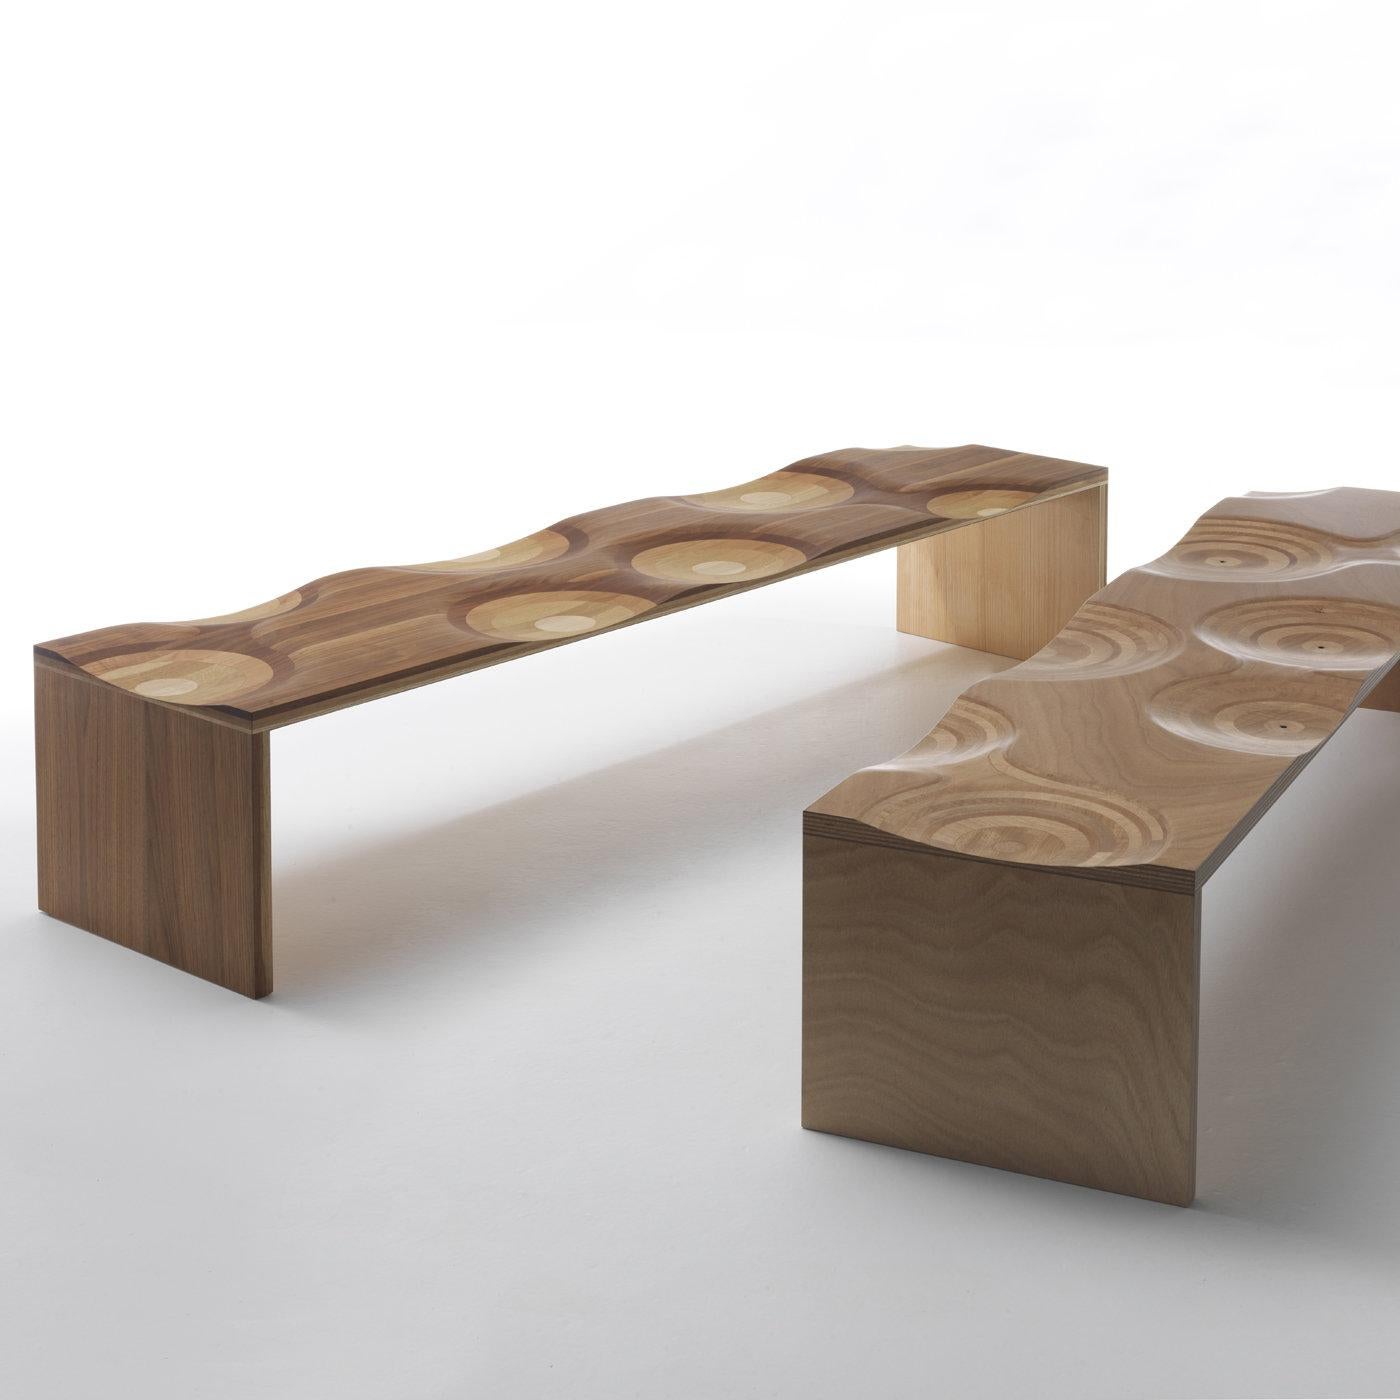 Ripples bench is the winner of the 2004 Golden Compass Award, boasting a unique, sculptural allure. Designed by Toyo Ito, this piece is skillfully crafted of five different types of wood (walnut, mahogany, cherry, oak, and ash), and features a seat